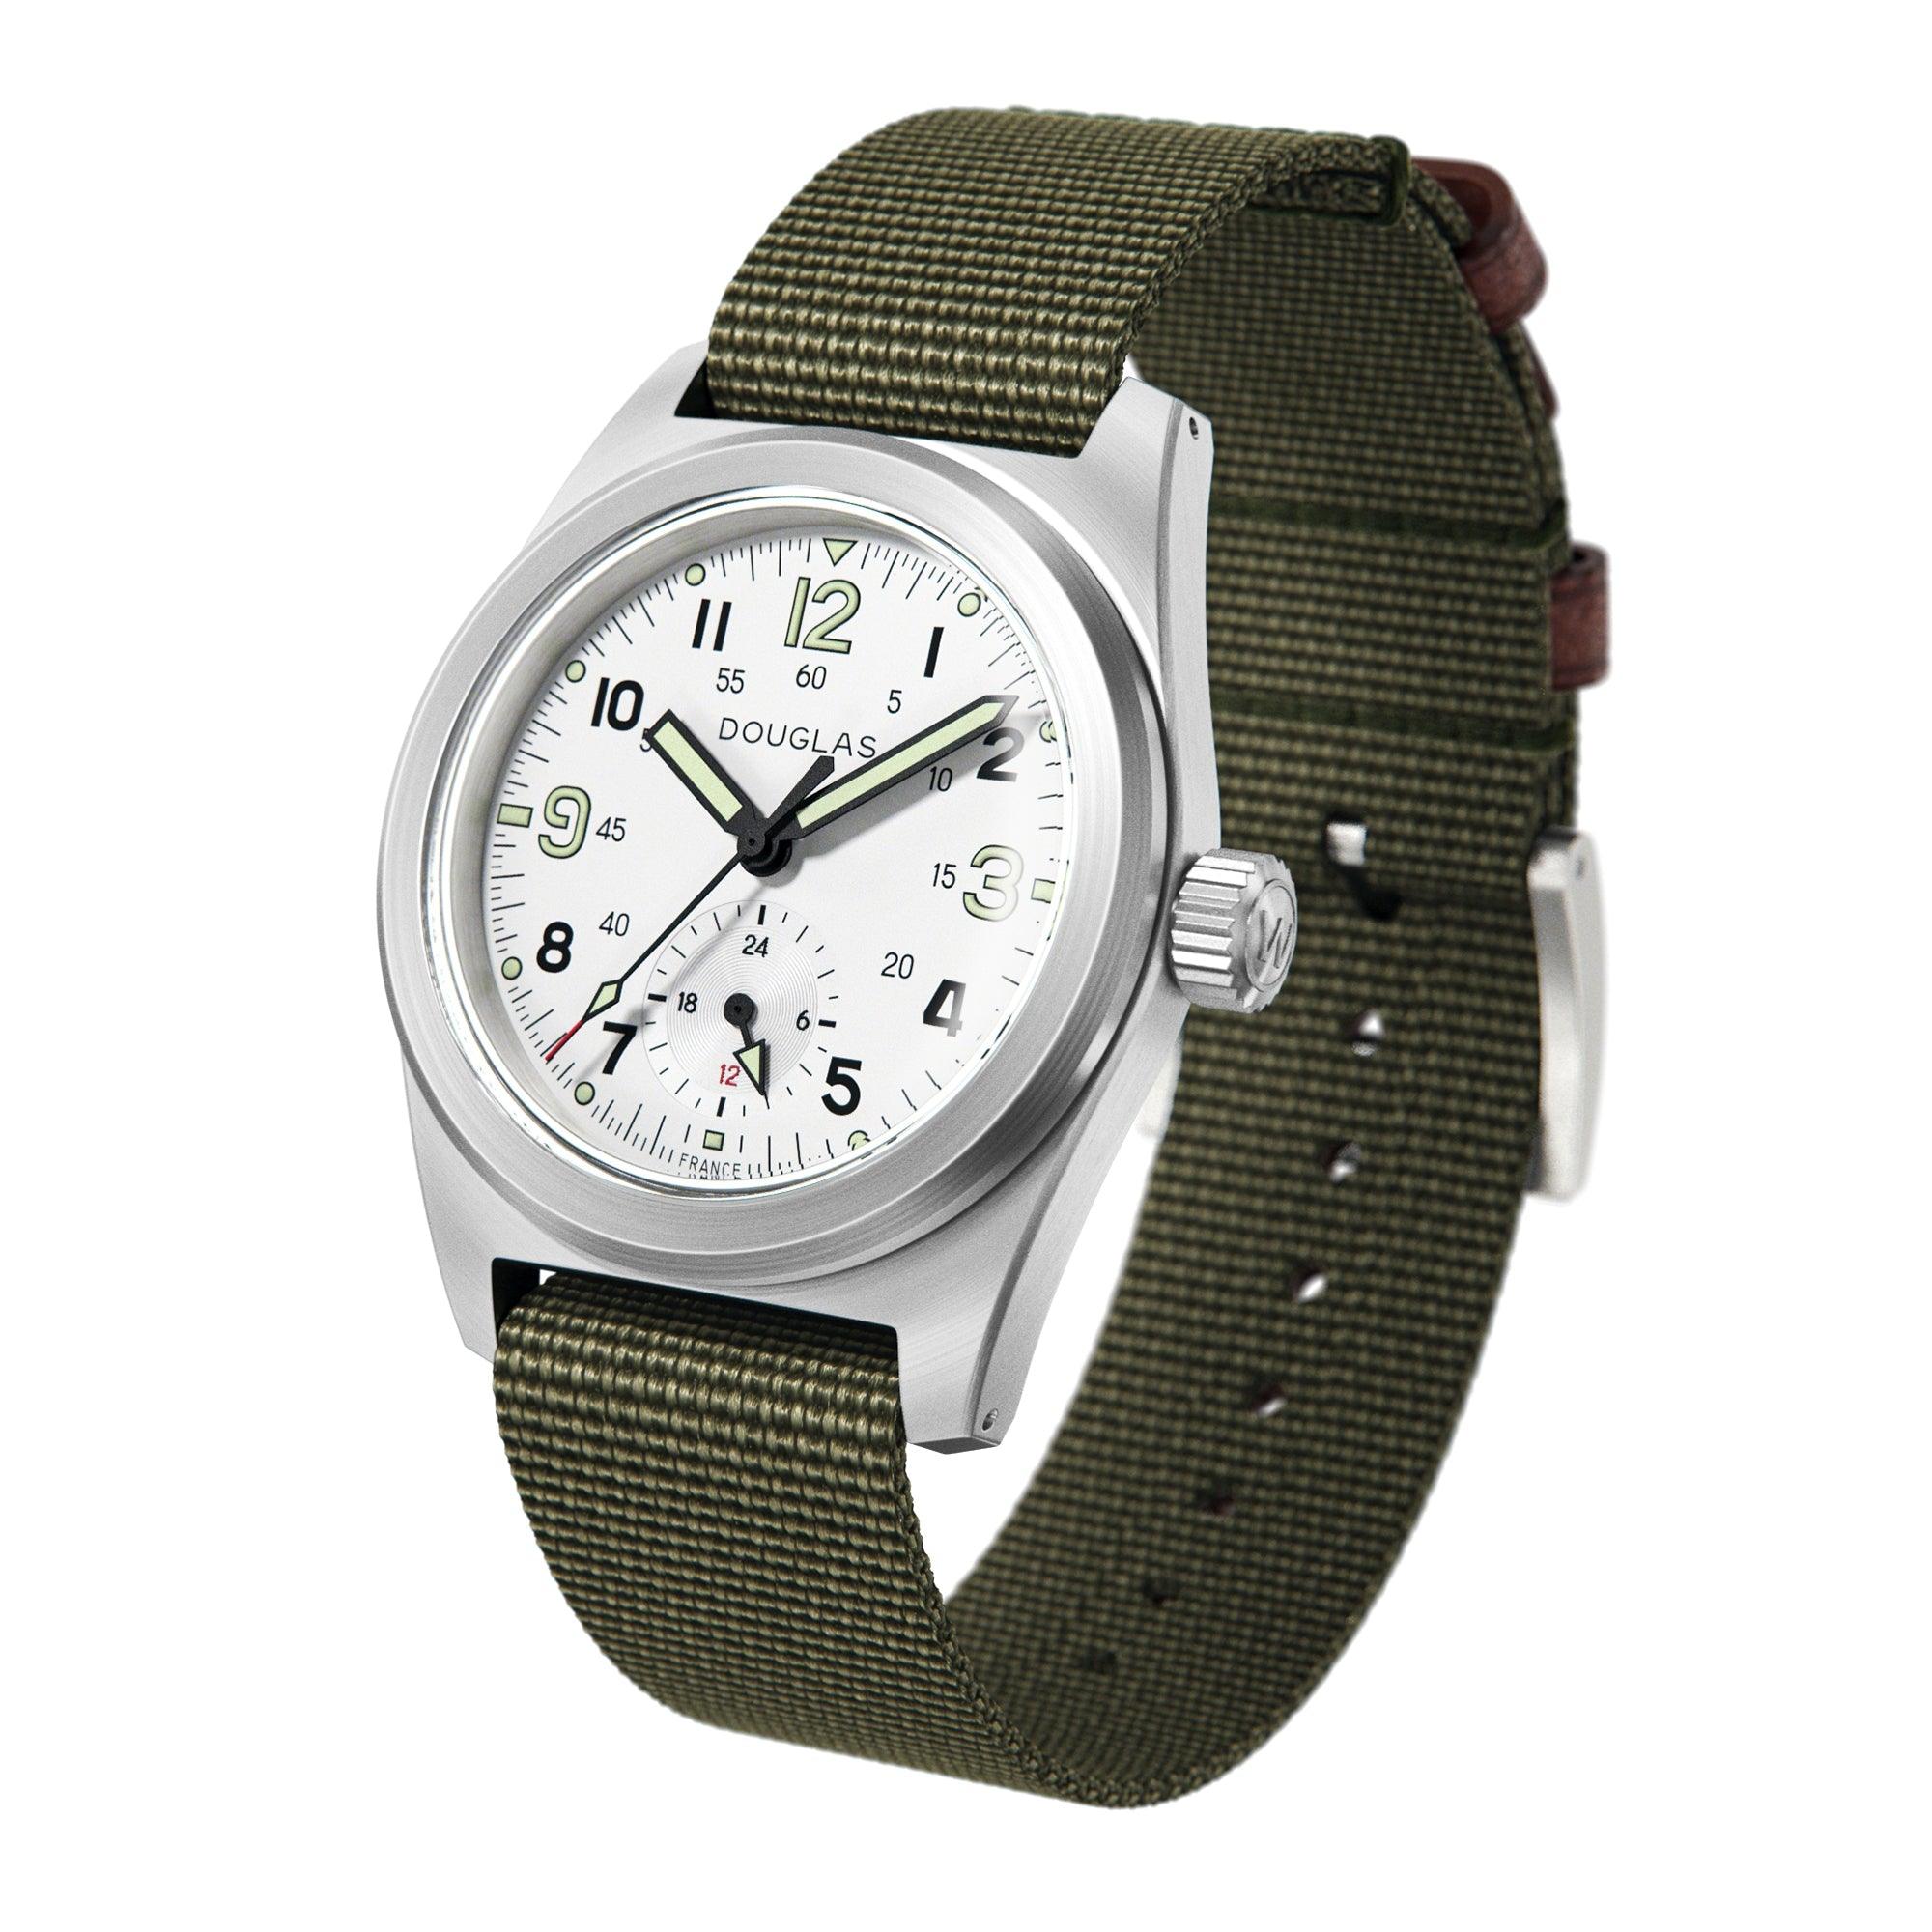 Outrider Professional Mecaquartz 38 Field Watch – White - Limited Edition